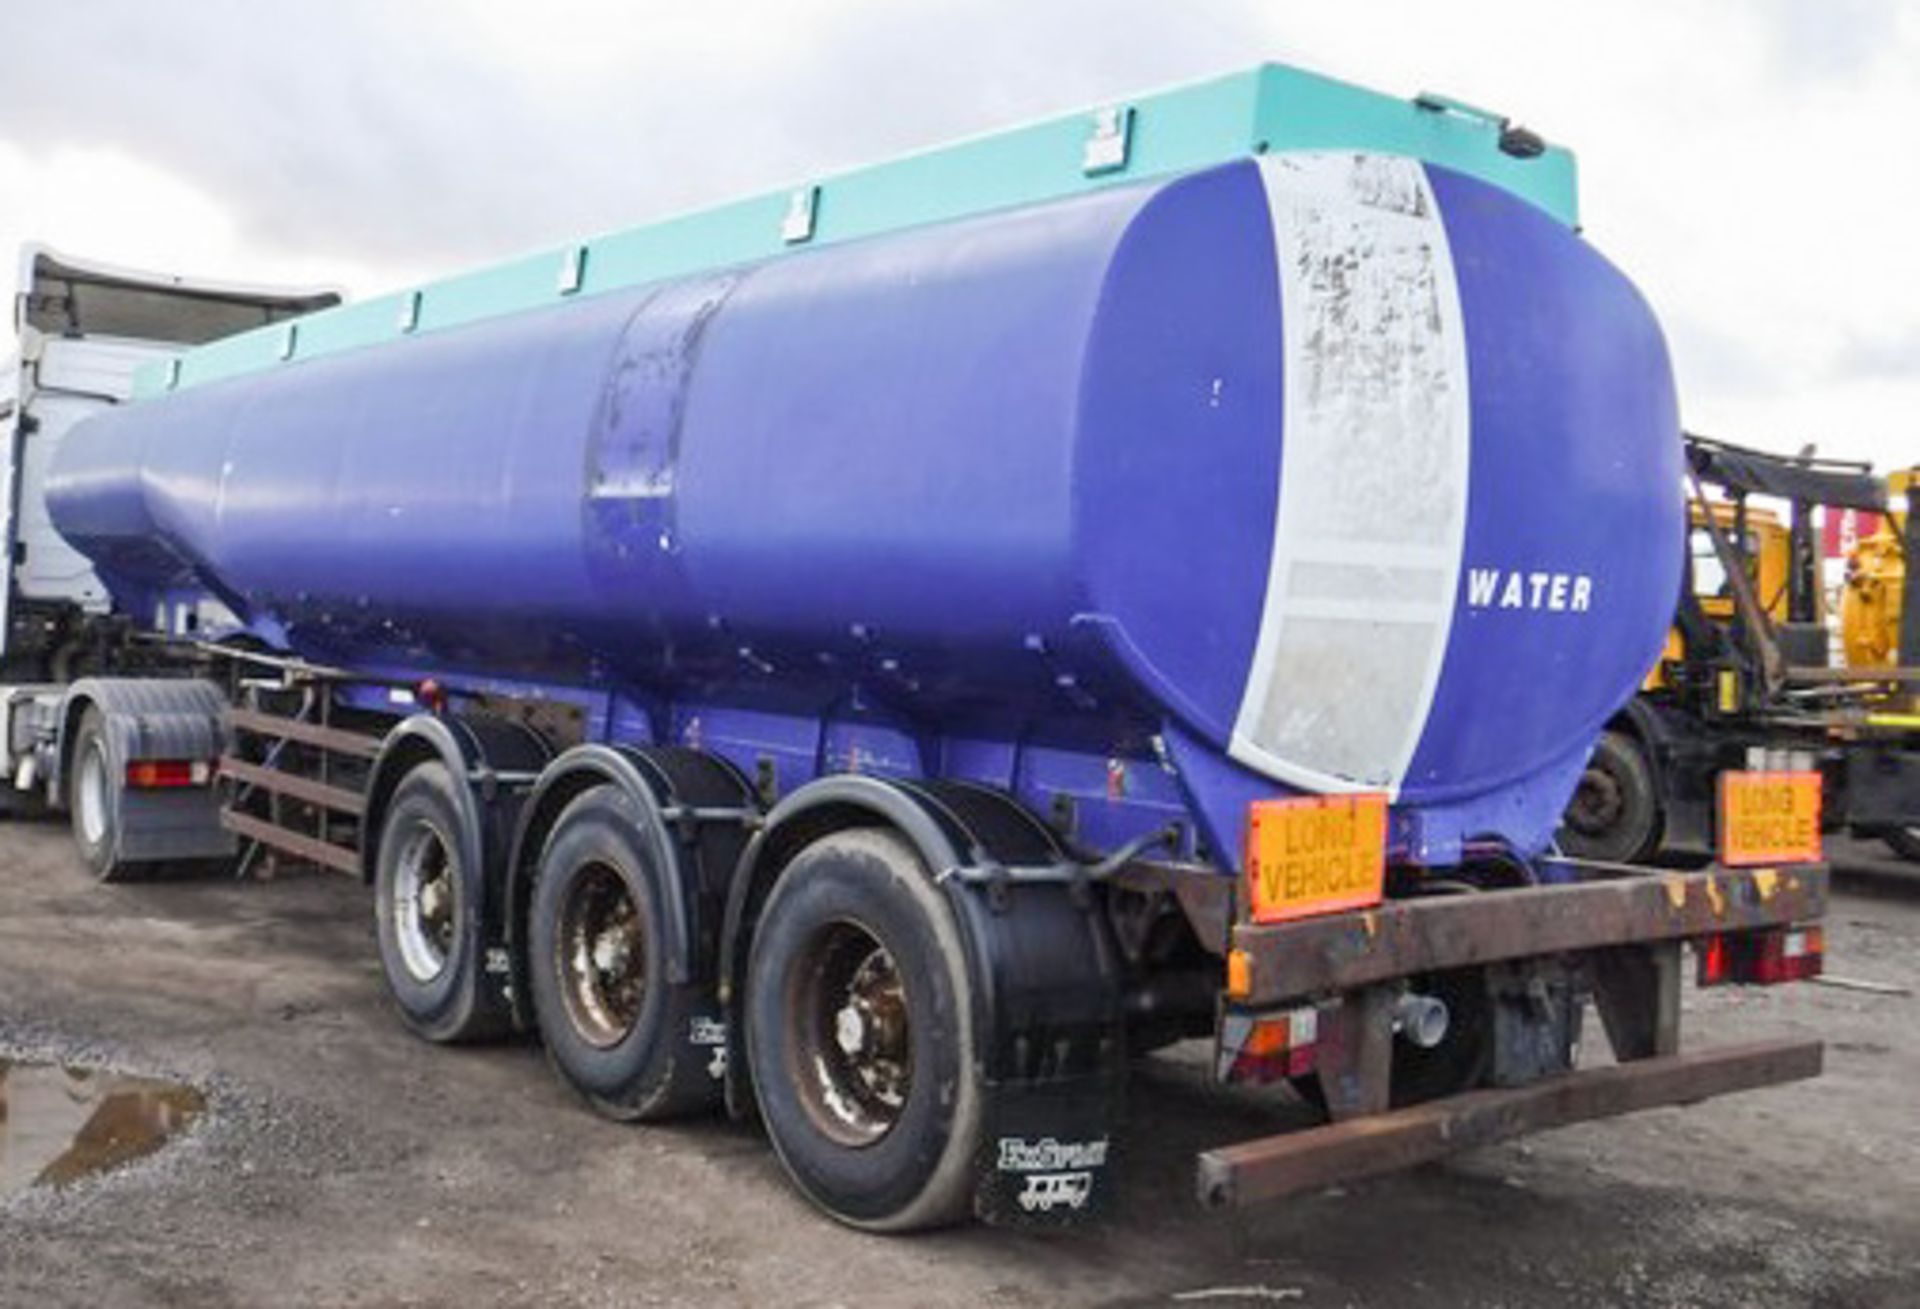 1985 FRUEHAUF WATER TANKER, CHASSIS NO - FT138807, TWIN AXLE, GROSS WEIGHT 32000KGS - Image 2 of 14